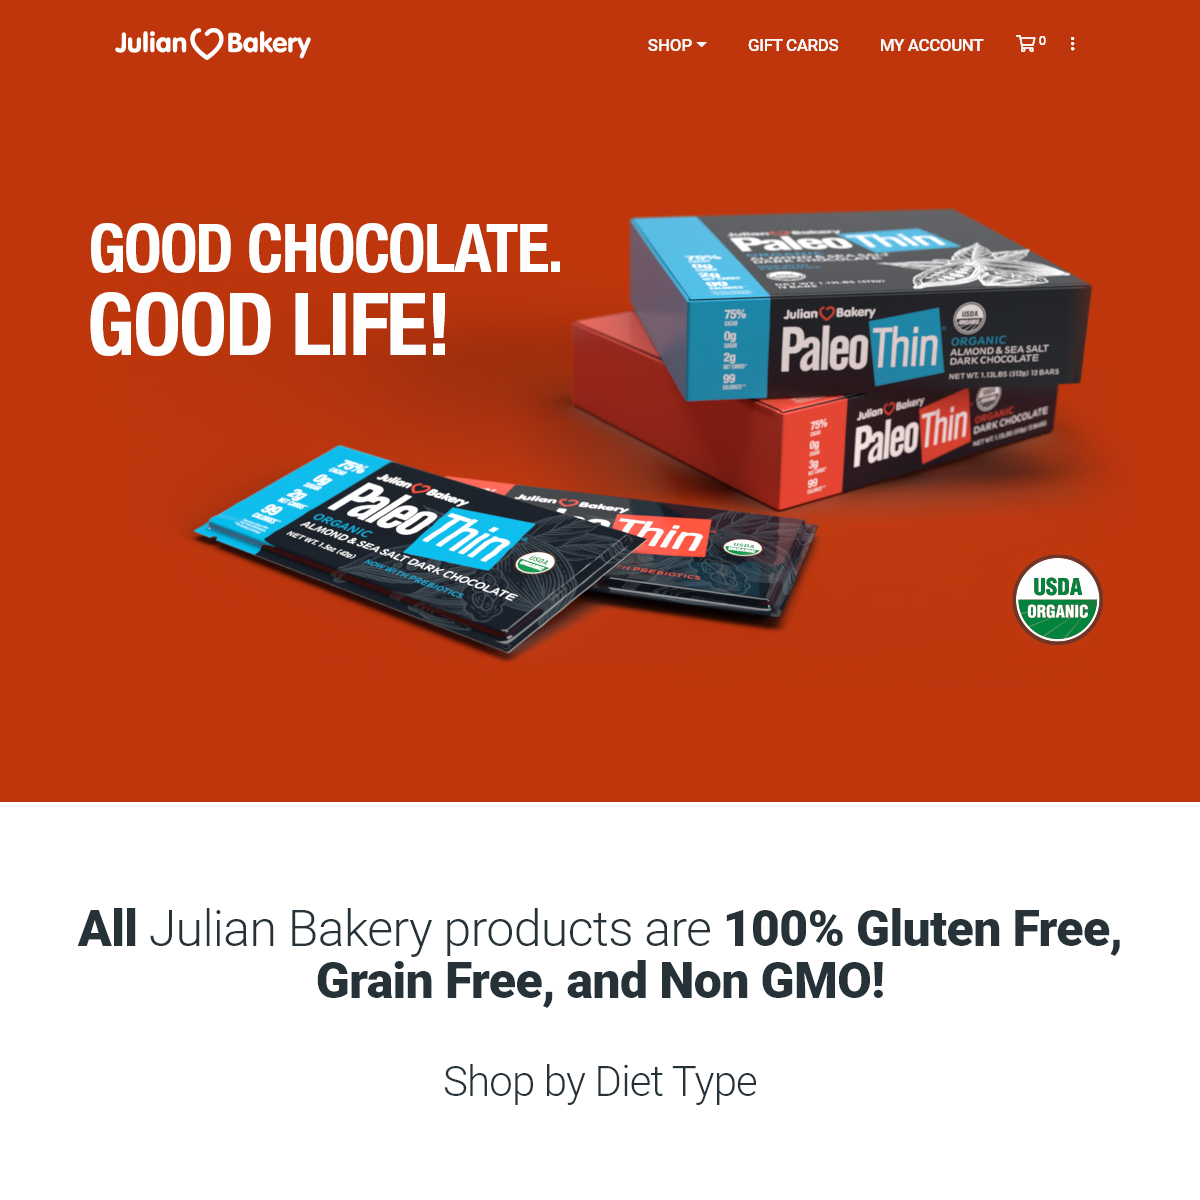 A complete backup of julianbakery.com